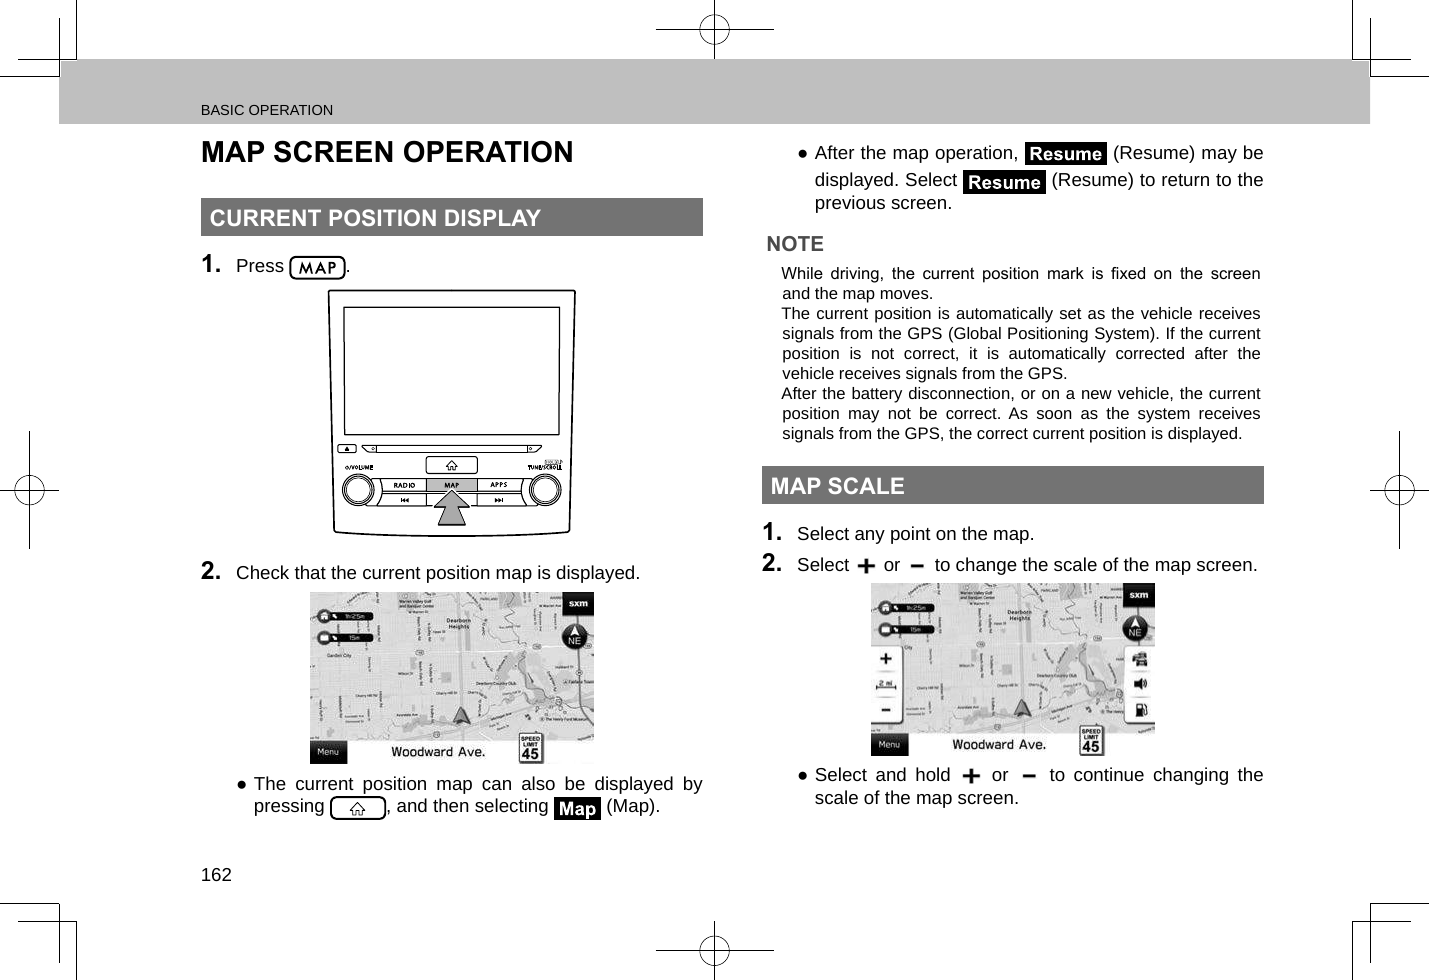 BASIC OPERATION162MAP SCREEN OPERATIONCURRENT POSITION DISPLAY1.  Press  .2.  Check that the current position map is displayed. ●The current position map can also be displayed by pressing  , and then selecting   (Map). ●After the map operation,   (Resume) may be displayed. Select   (Resume) to return to the previous screen.NOTE lWhile  driving,  the  current  position  mark  is  xed  on  the  screen and the map moves. lThe current position is automatically set as the vehicle receives signals from the GPS (Global Positioning System). If the current position is not correct, it is automatically corrected after the vehicle receives signals from the GPS. lAfter the battery disconnection, or on a new vehicle, the current position may not be correct. As soon as the system receives signals from the GPS, the correct current position is displayed.MAP SCALE1.  Select any point on the map.2.  Select   or   to change the scale of the map screen. ●Select and hold   or   to continue changing the scale of the map screen.